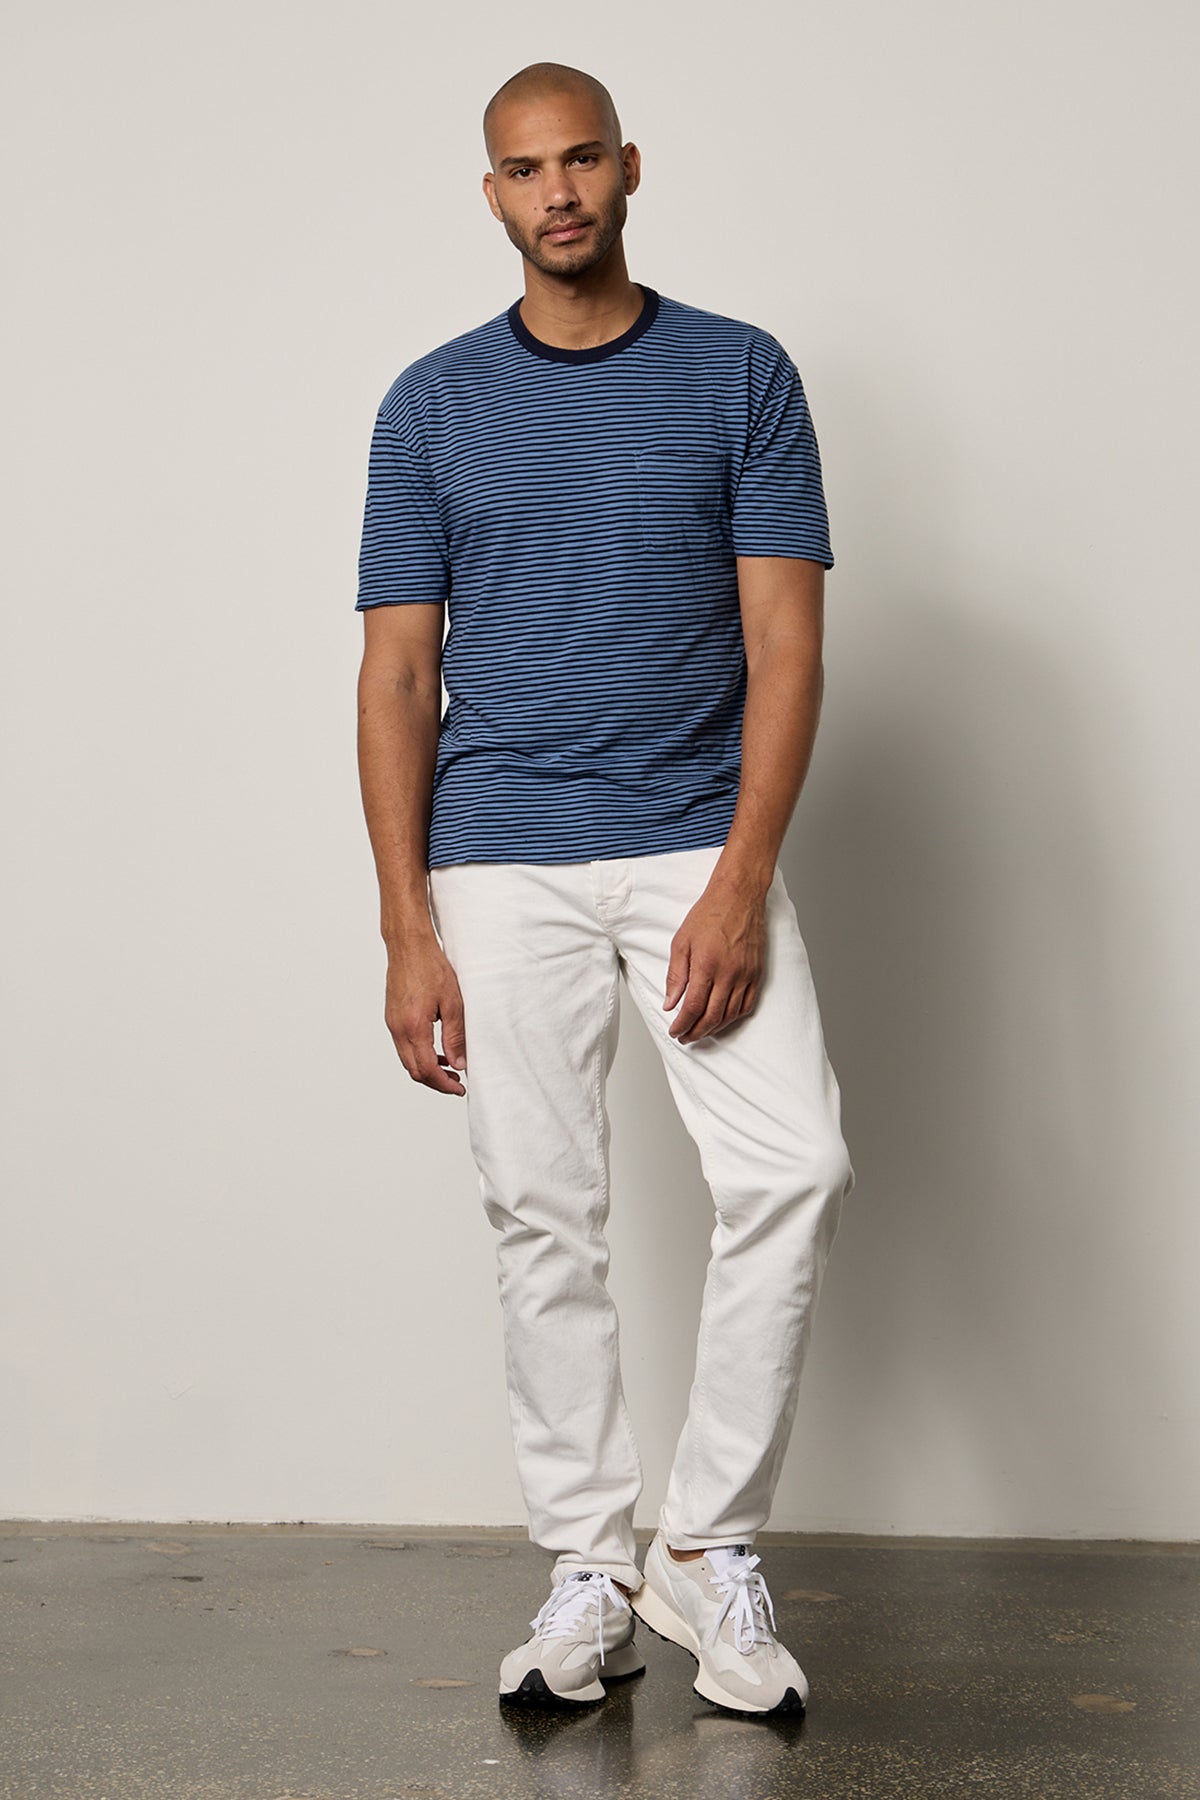   Jeremy Crew Neck Tee with medium and dark blue stripes, front pocket, paired with white denim full length front with New Balance sneakers 